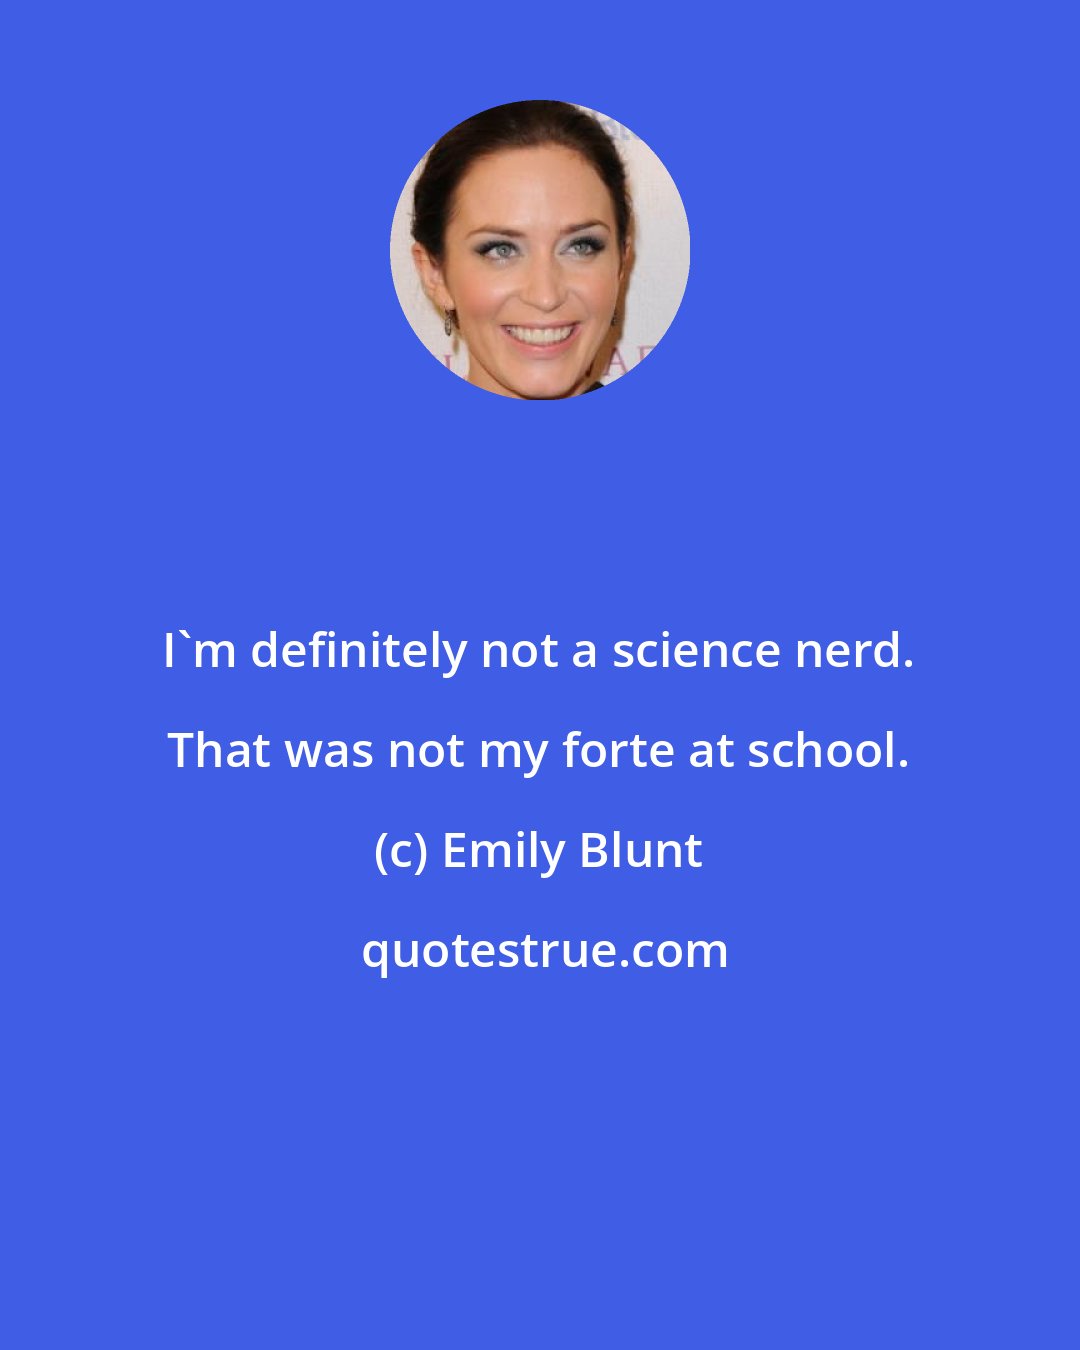 Emily Blunt: I'm definitely not a science nerd. That was not my forte at school.